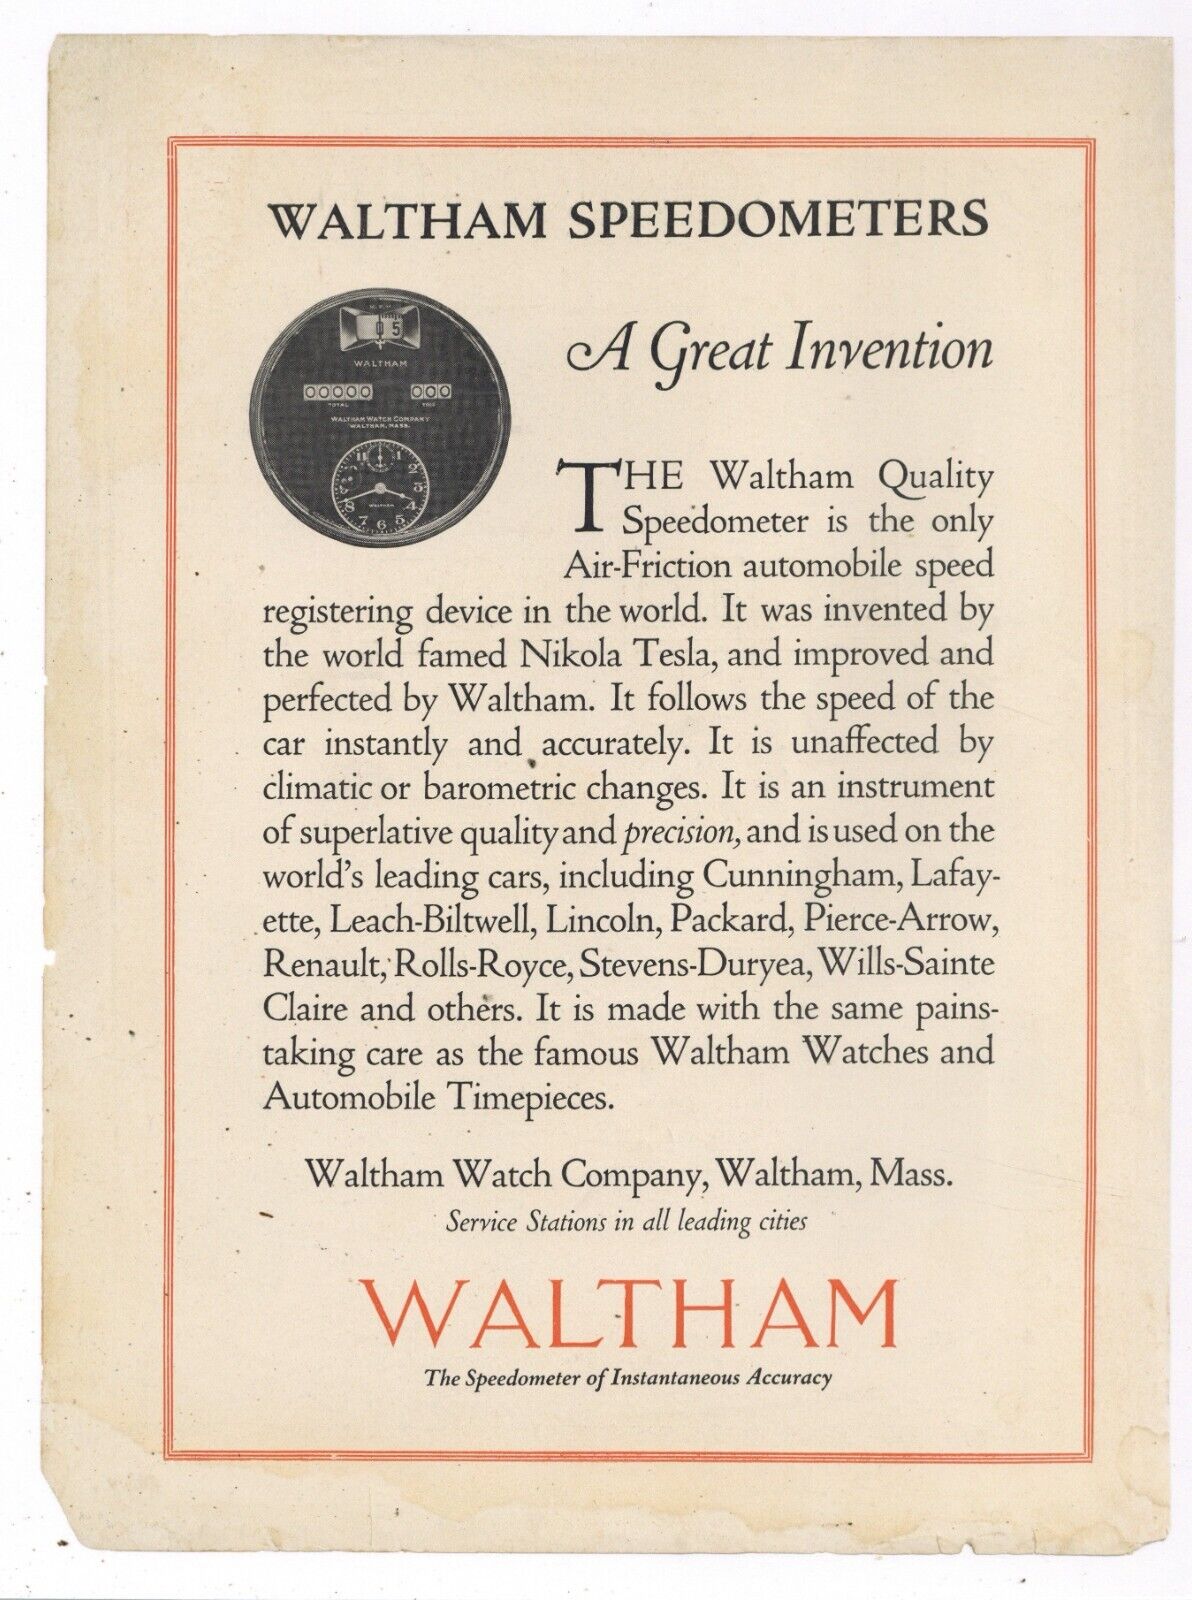 1921 Waltham Watch Co. Ad: Auto Speedometers - Instantaneous Accuracy.